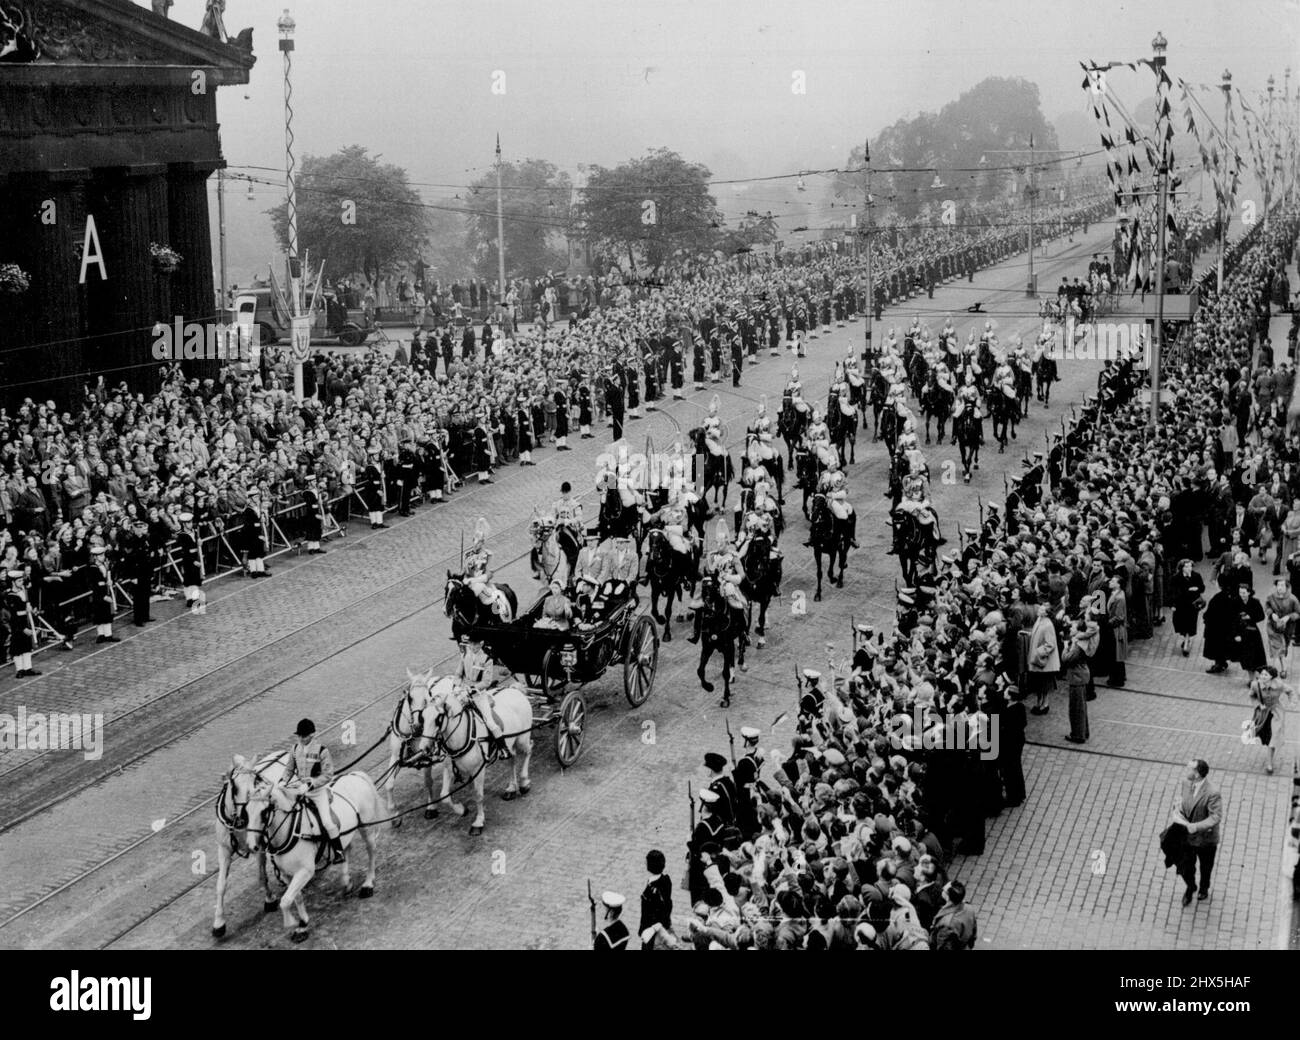 Queen and Duke in Edinburgh. The Royal coach carrying the Queen and the Duke of Edinburgh passes in procession along Princes Street in front of the Royal Scottish Academy, shortly after, the Royal couple had arrived here for their Coronation State Visit to Scotland. June 24, 1953. Stock Photo